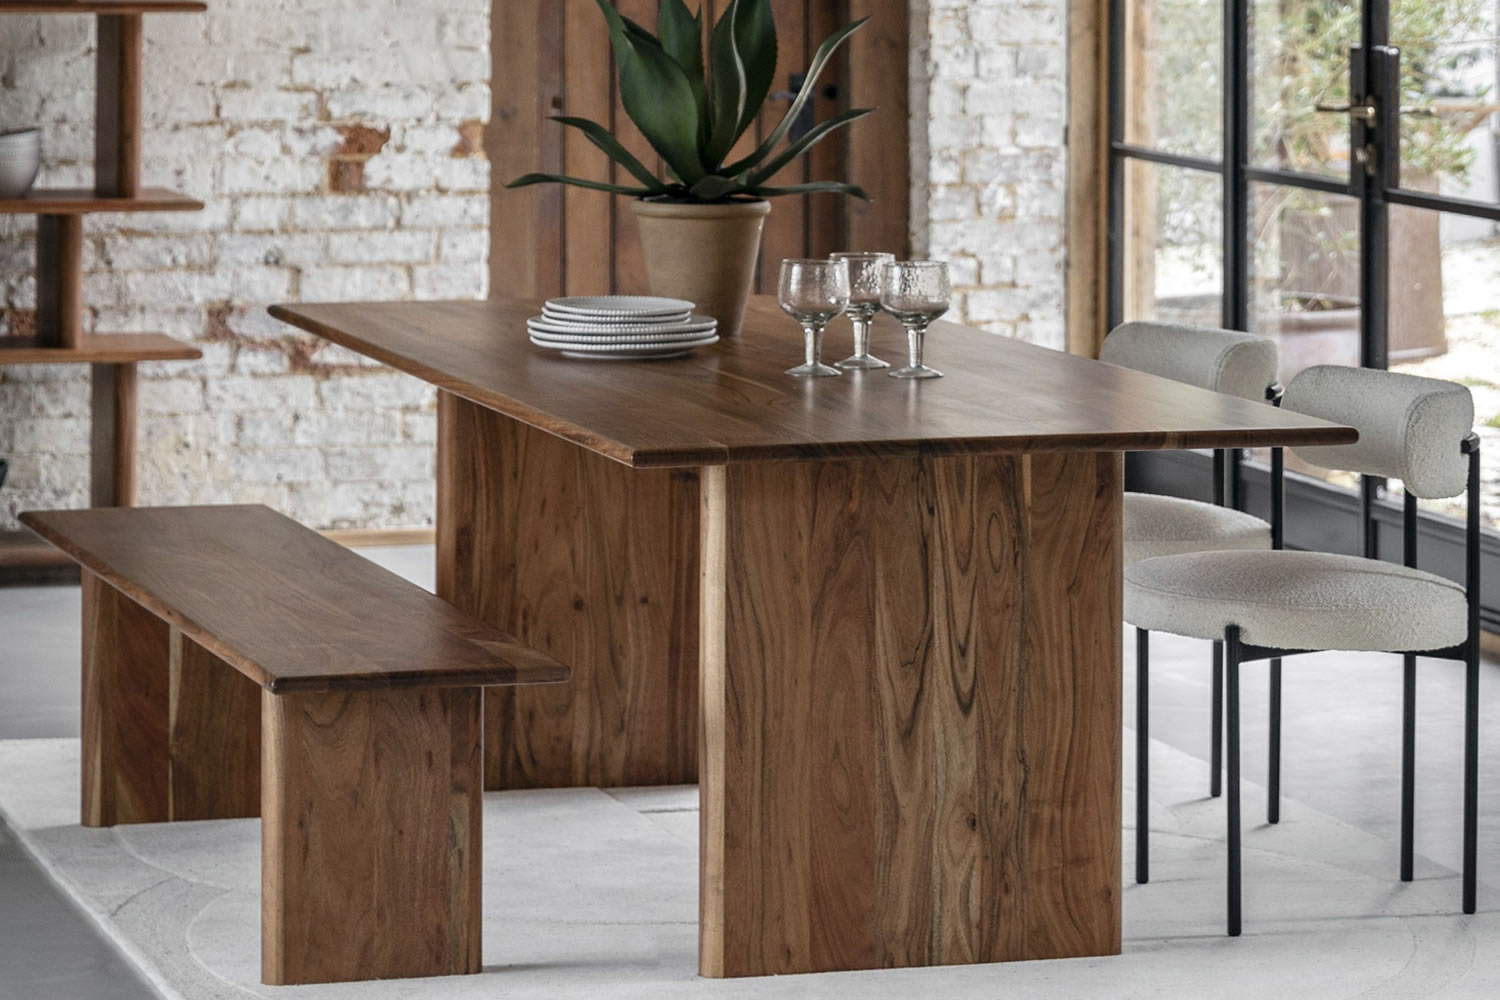 View Large Borden Wooden Kitchen Dining Table Crafted From Solid Acacia Wood Rich Grain Finish Robust Solid Legs Seats Up To 810 People information